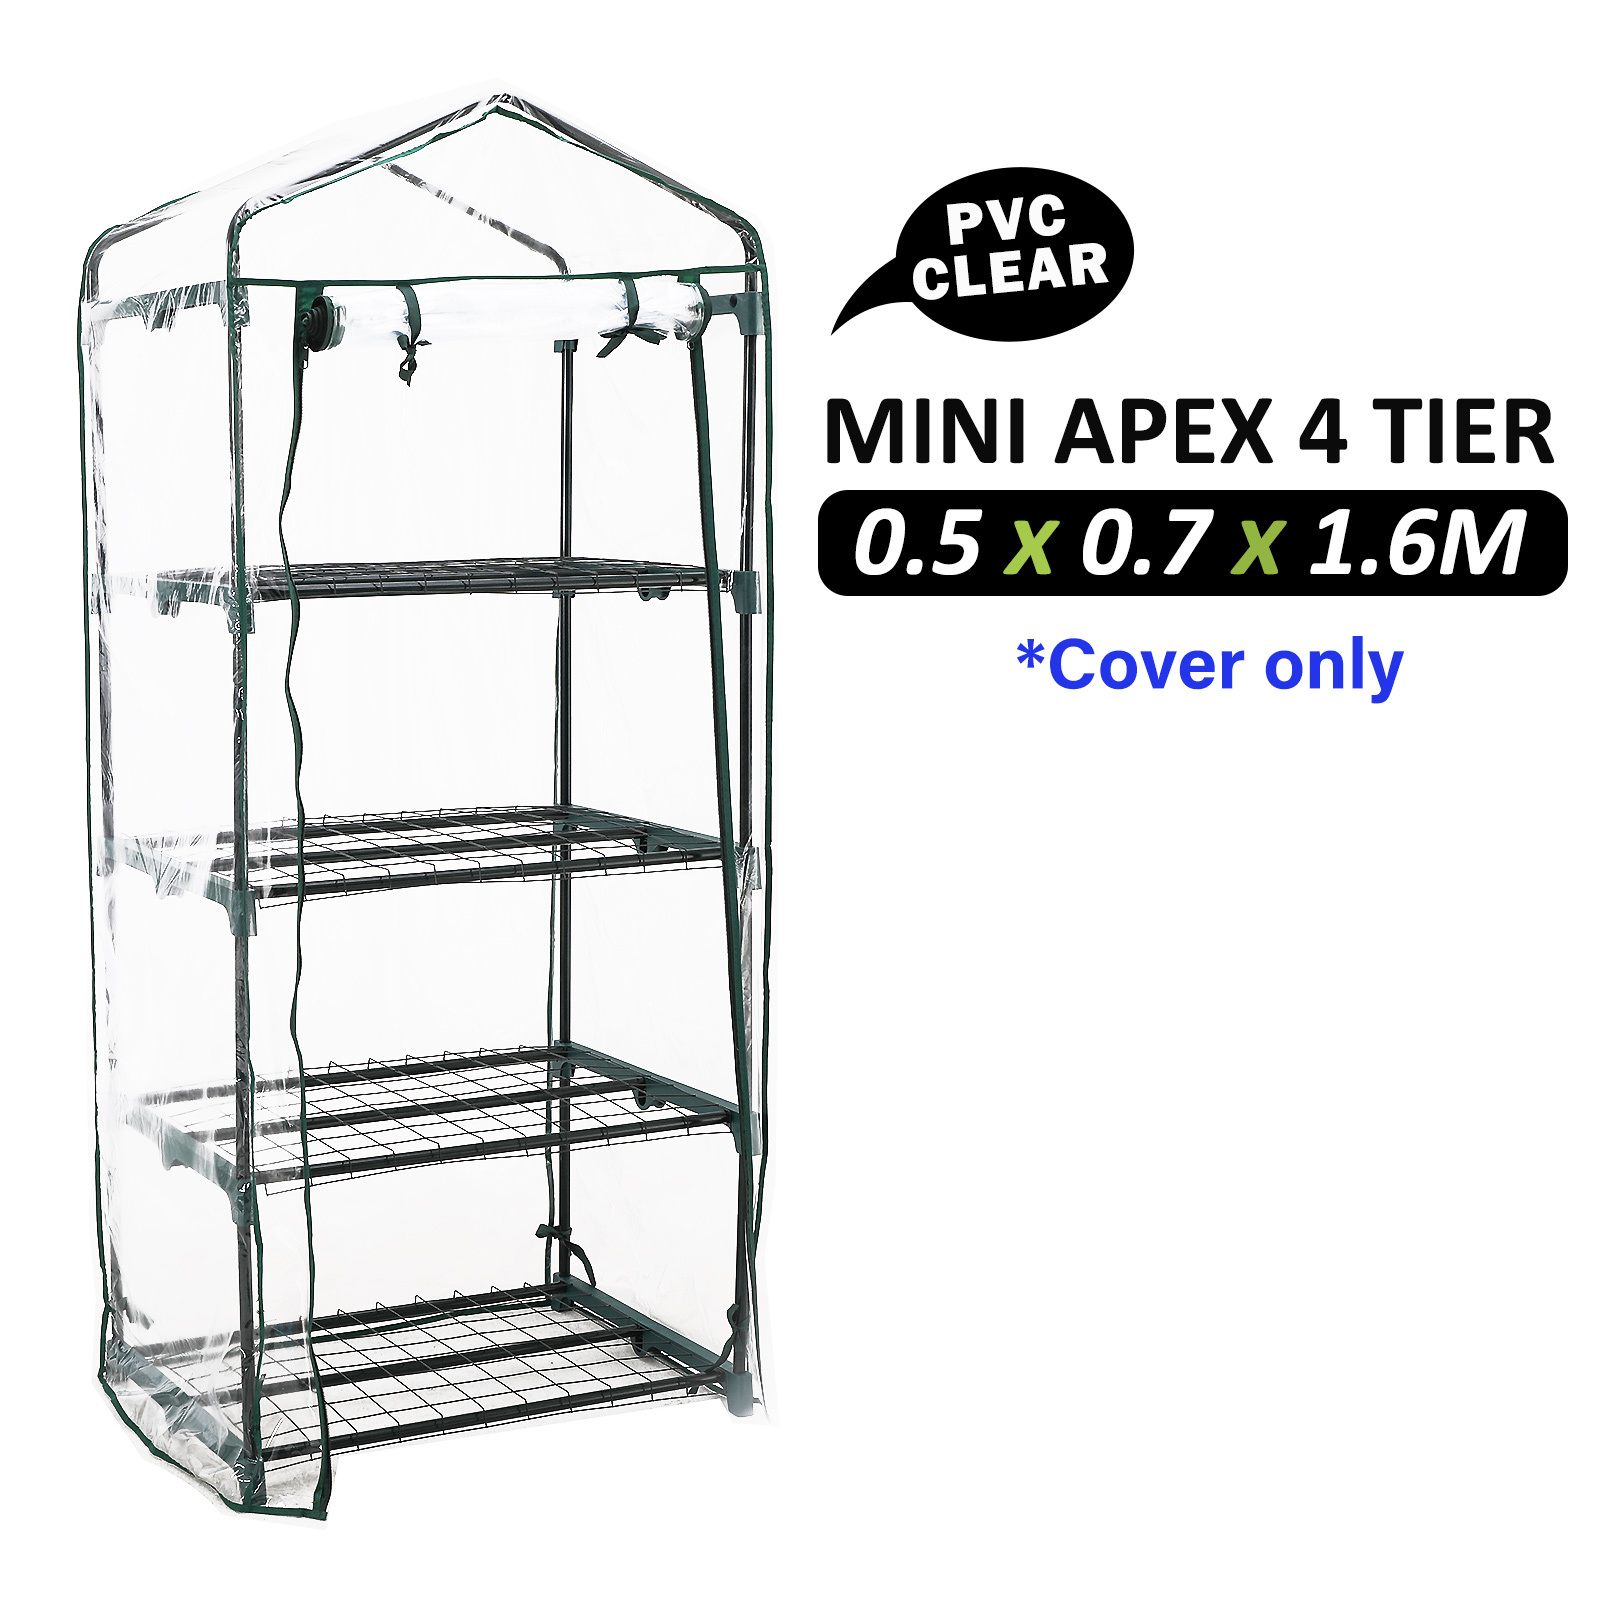 4 Tier Greenhouse Mini PVC Apex Roof Cover Only - CLEAR